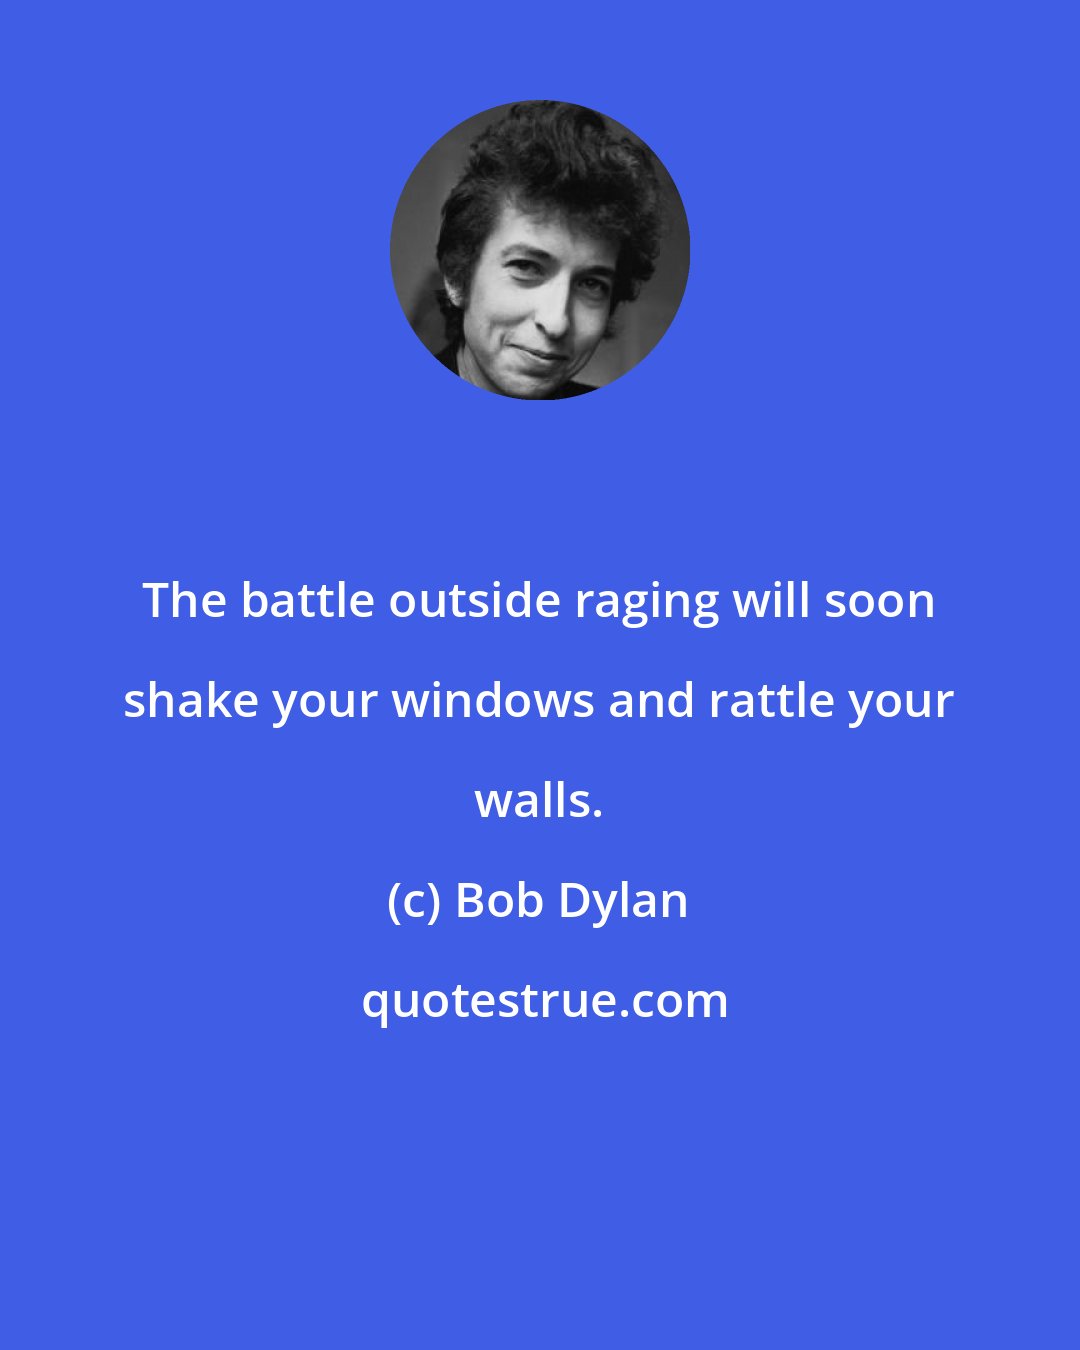 Bob Dylan: The battle outside raging will soon shake your windows and rattle your walls.